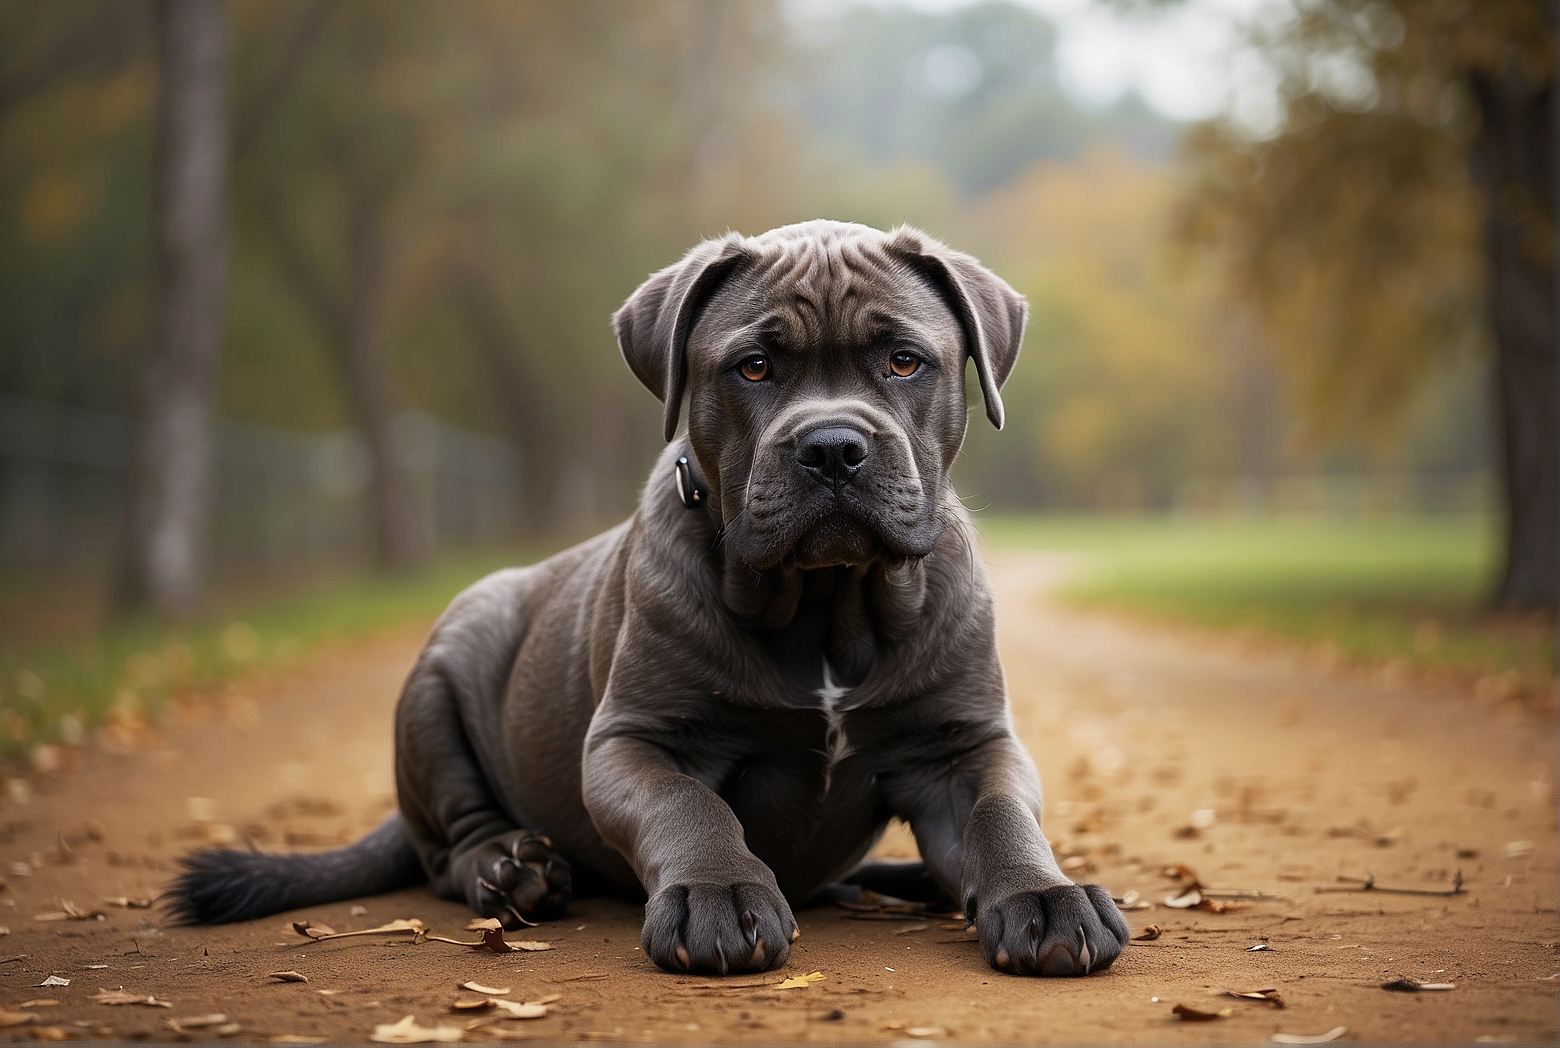 How to Properly Care for a Cane Corso